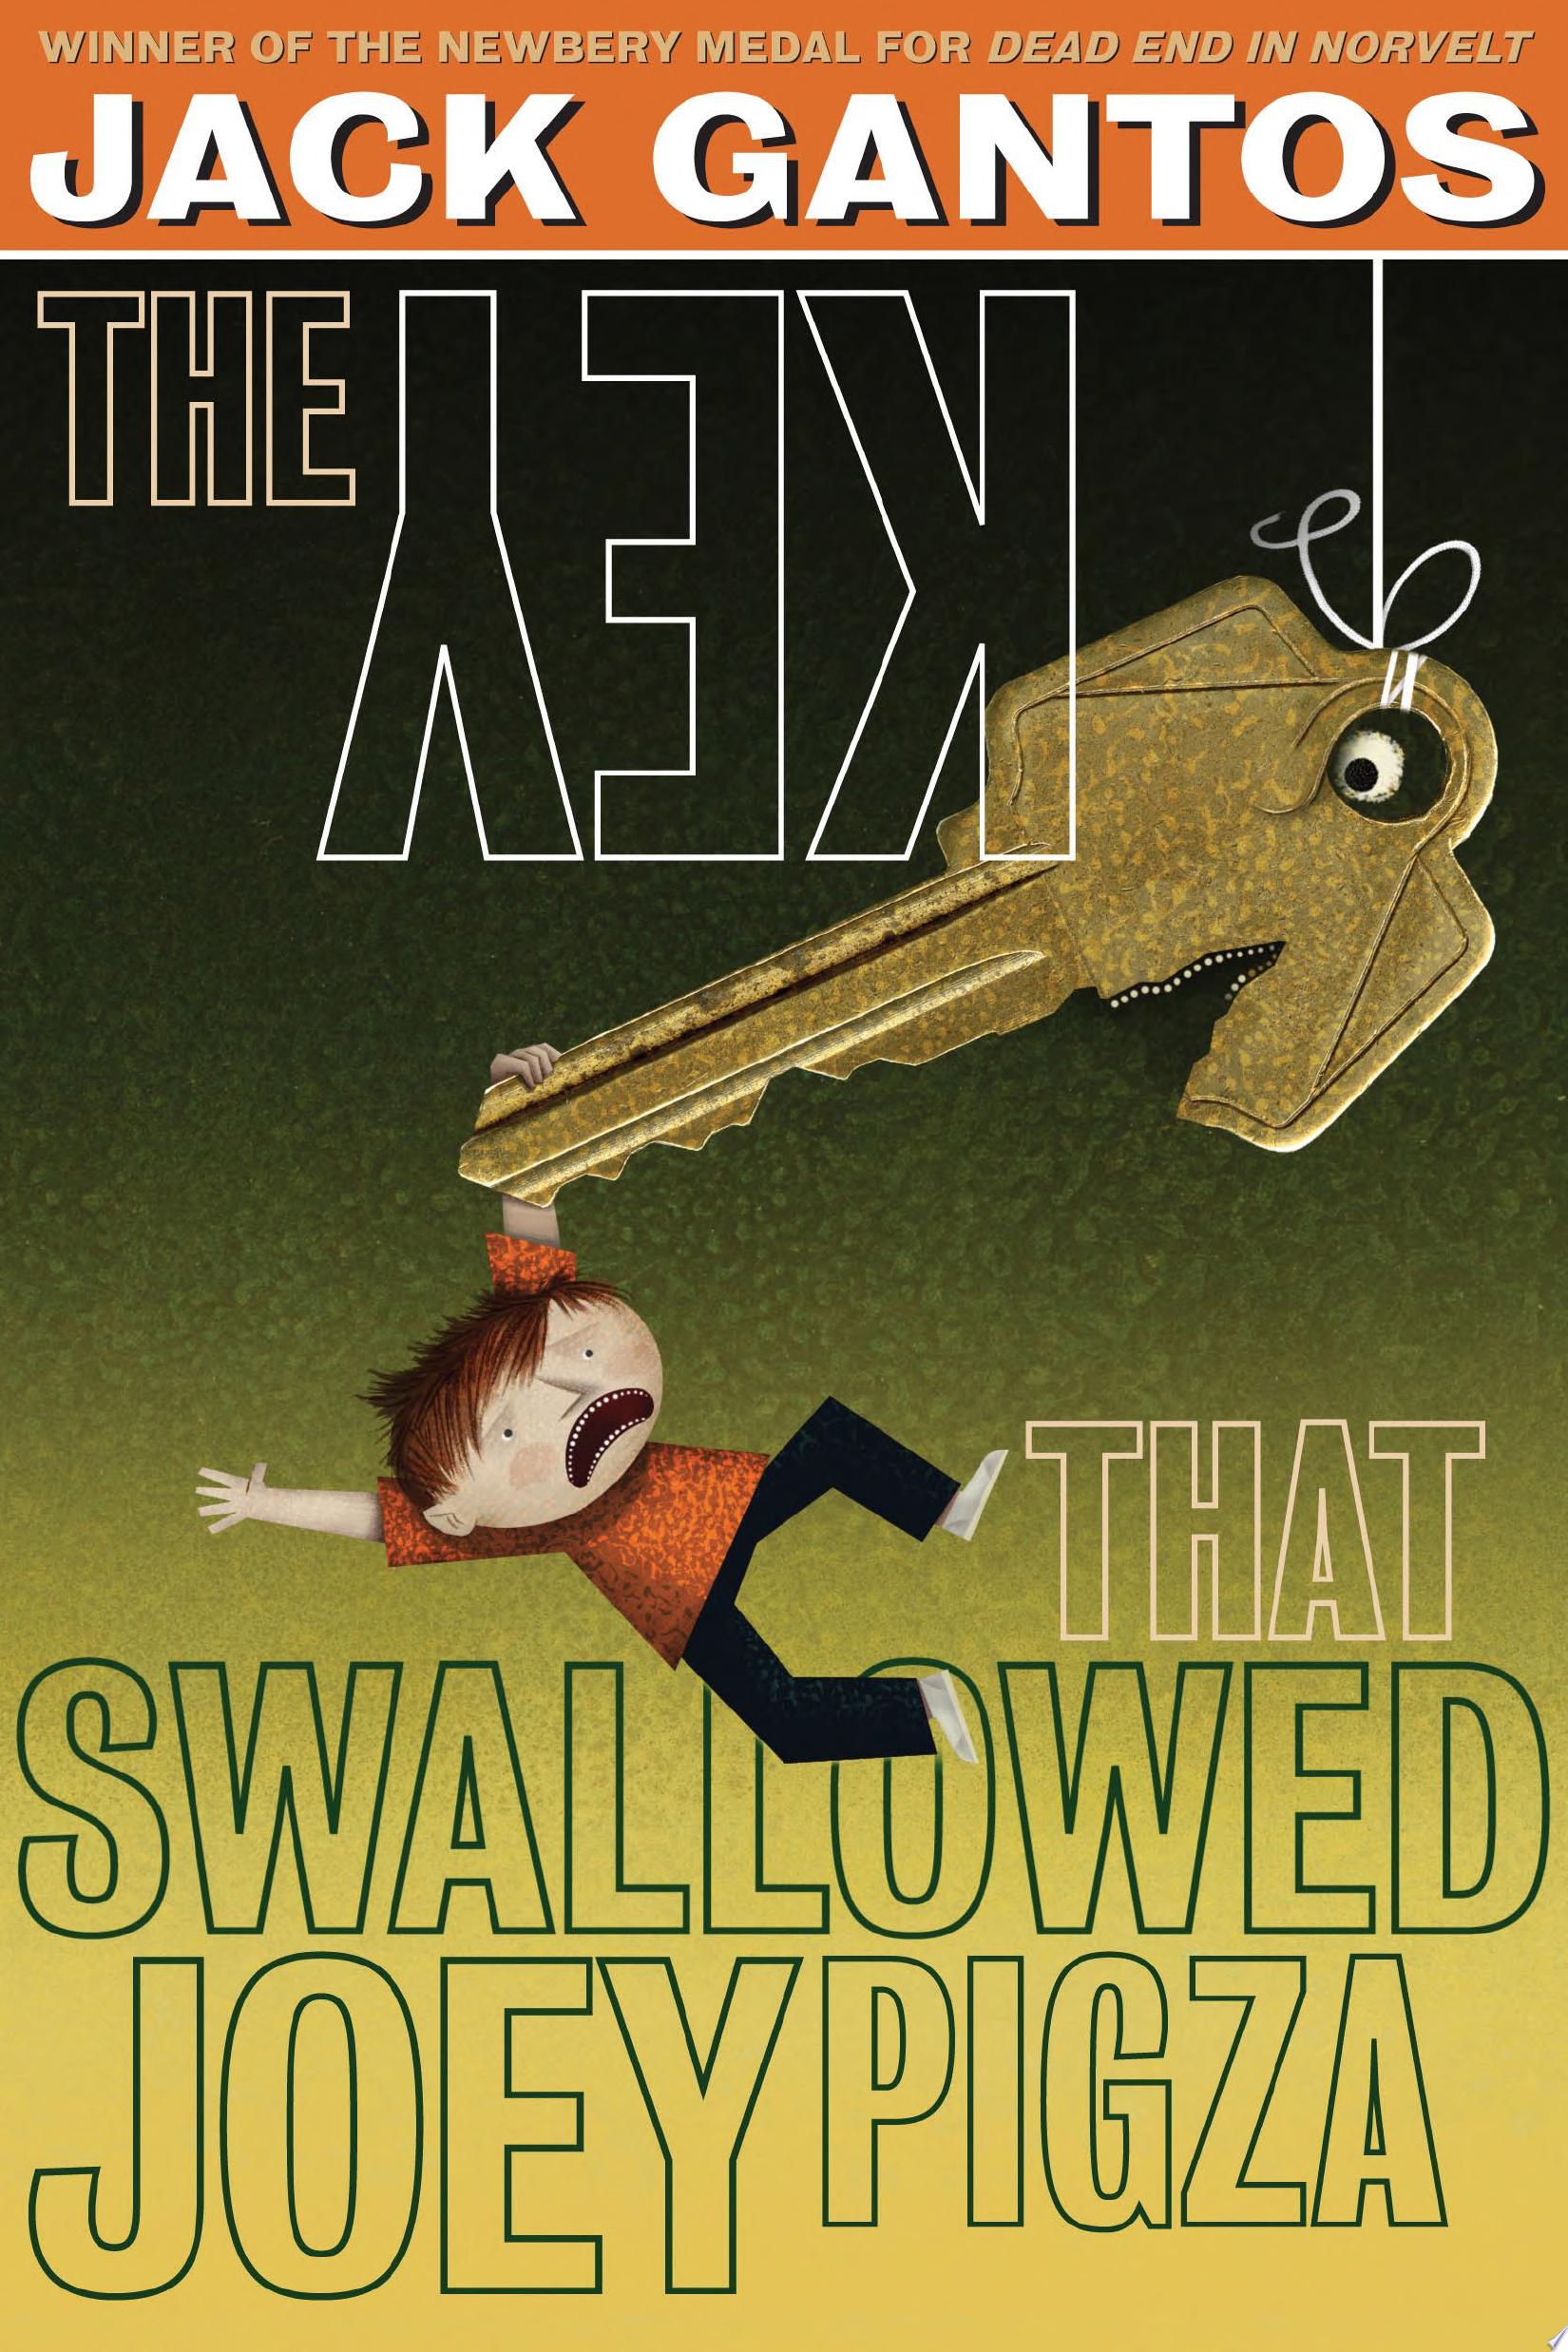 Image for "The Key That Swallowed Joey Pigza"